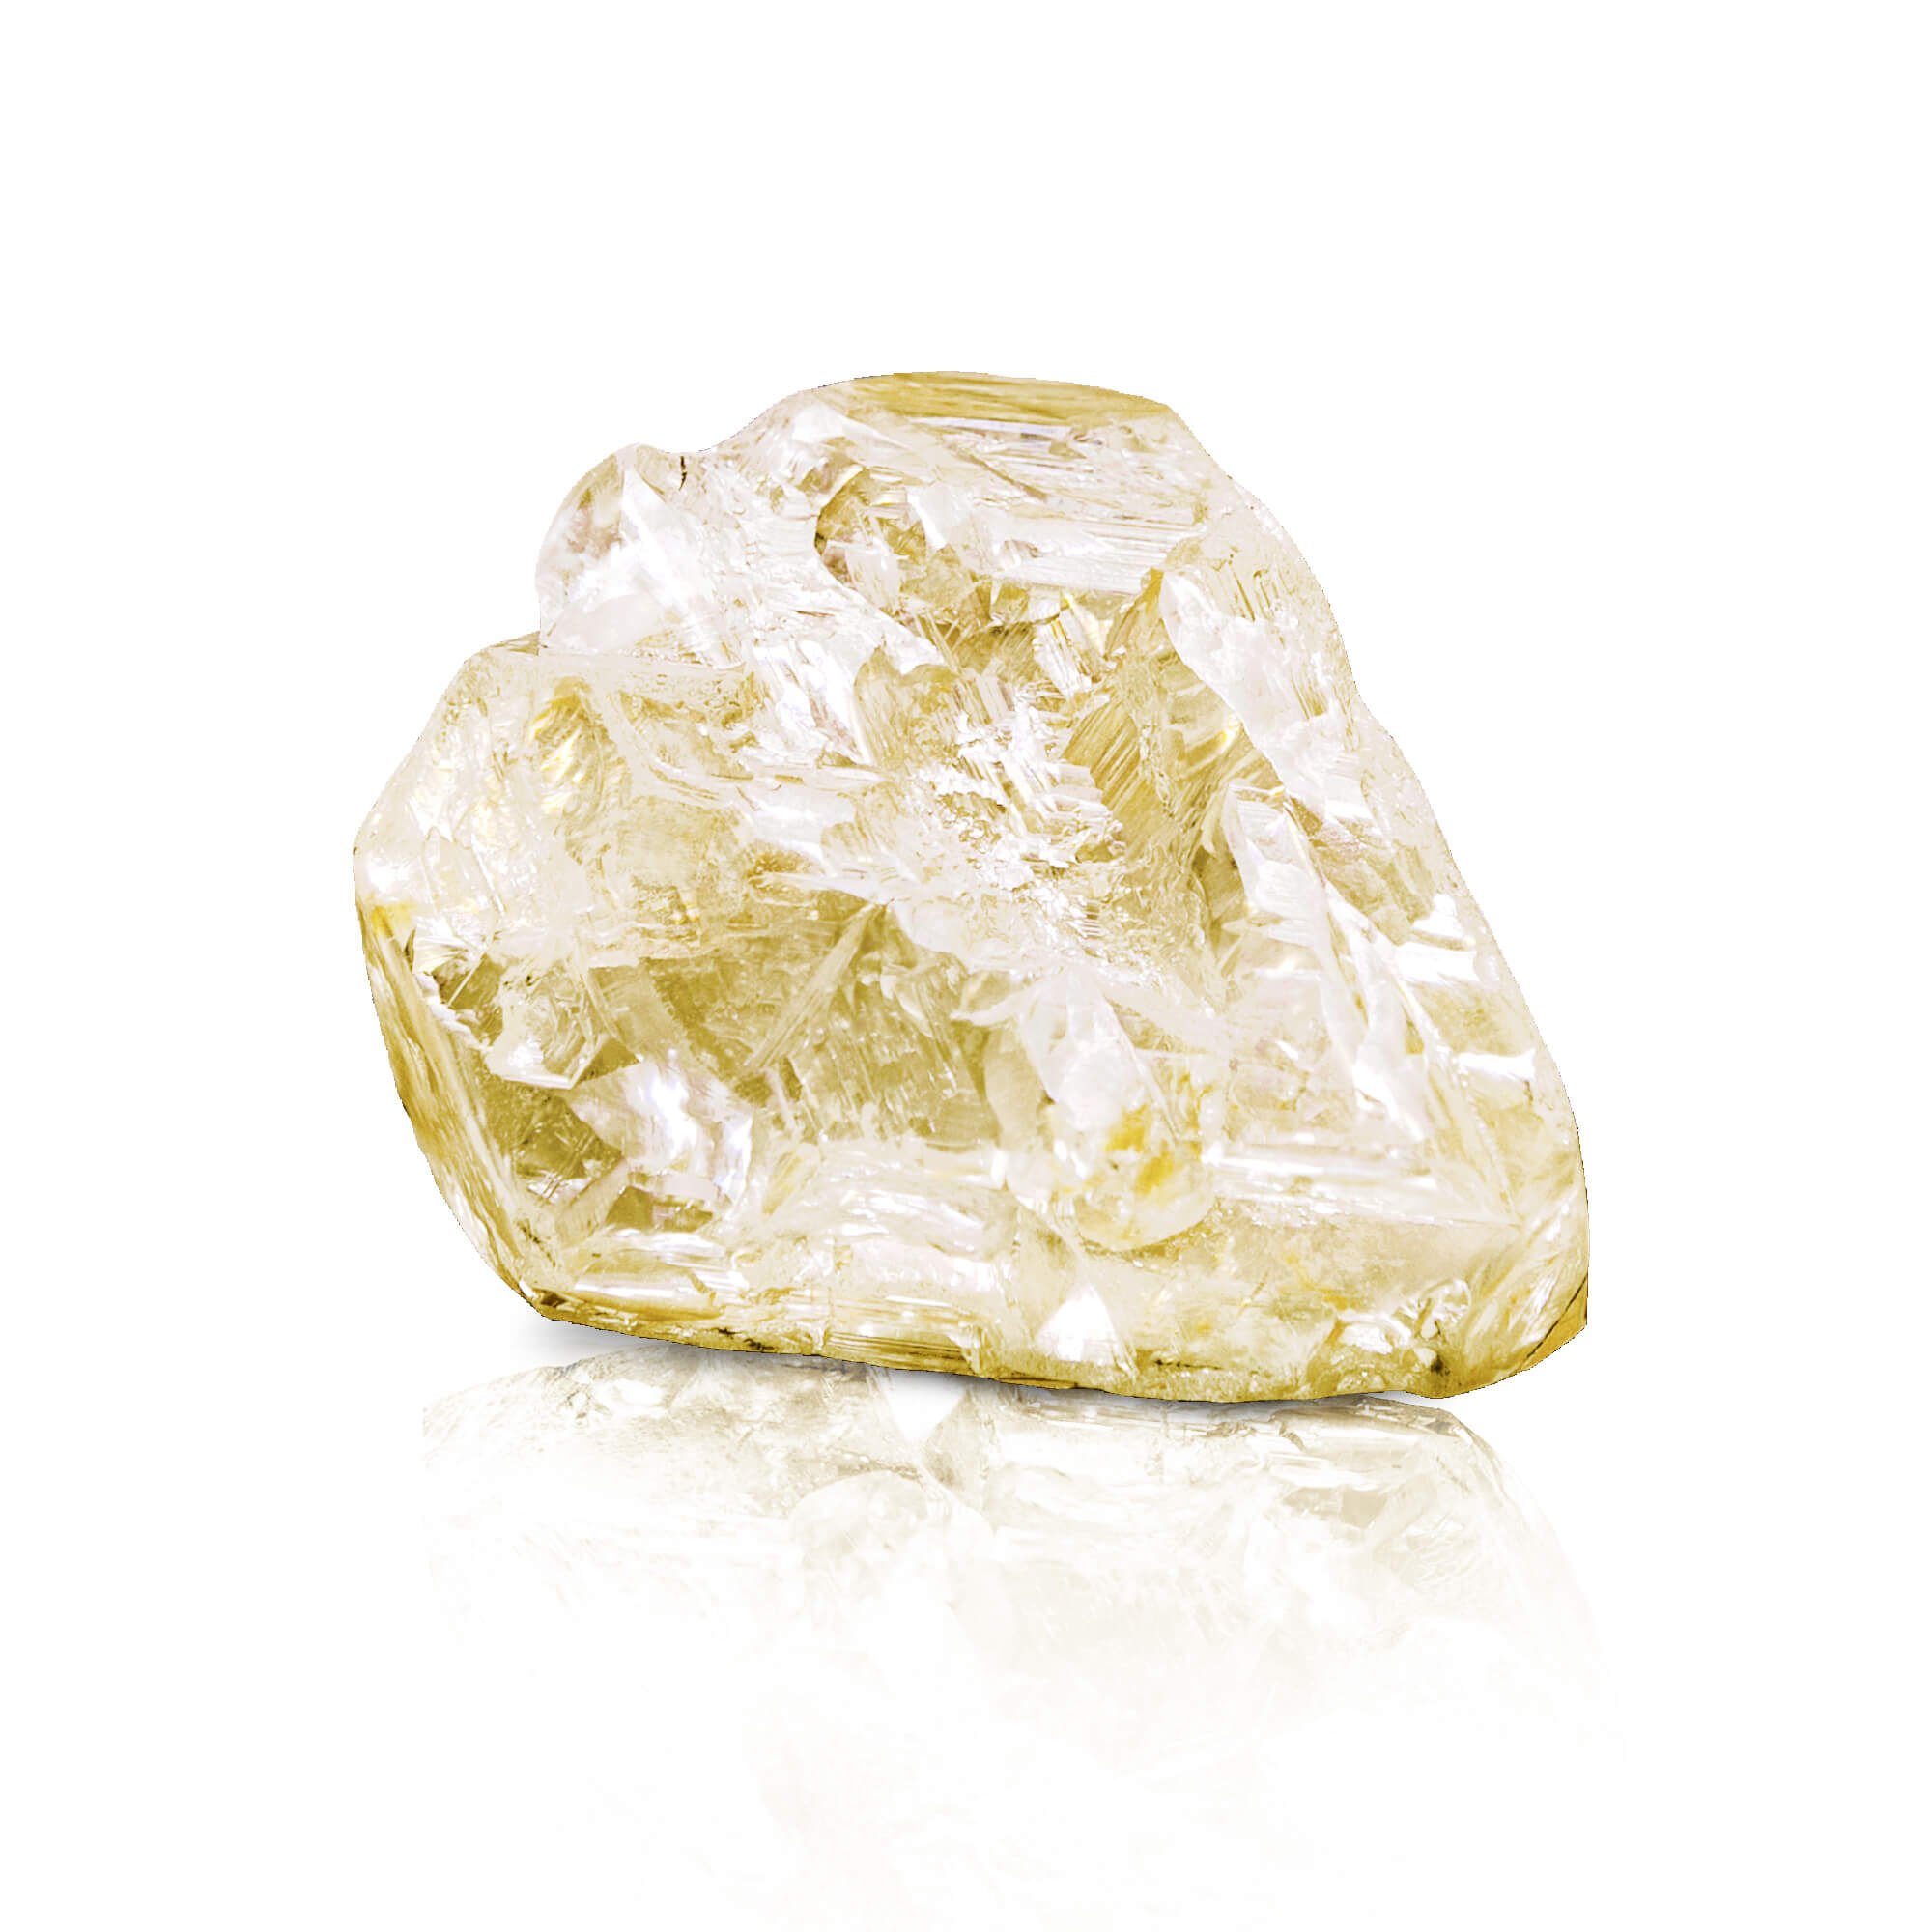 The 709 carat Peace Diamond acquired by Graff